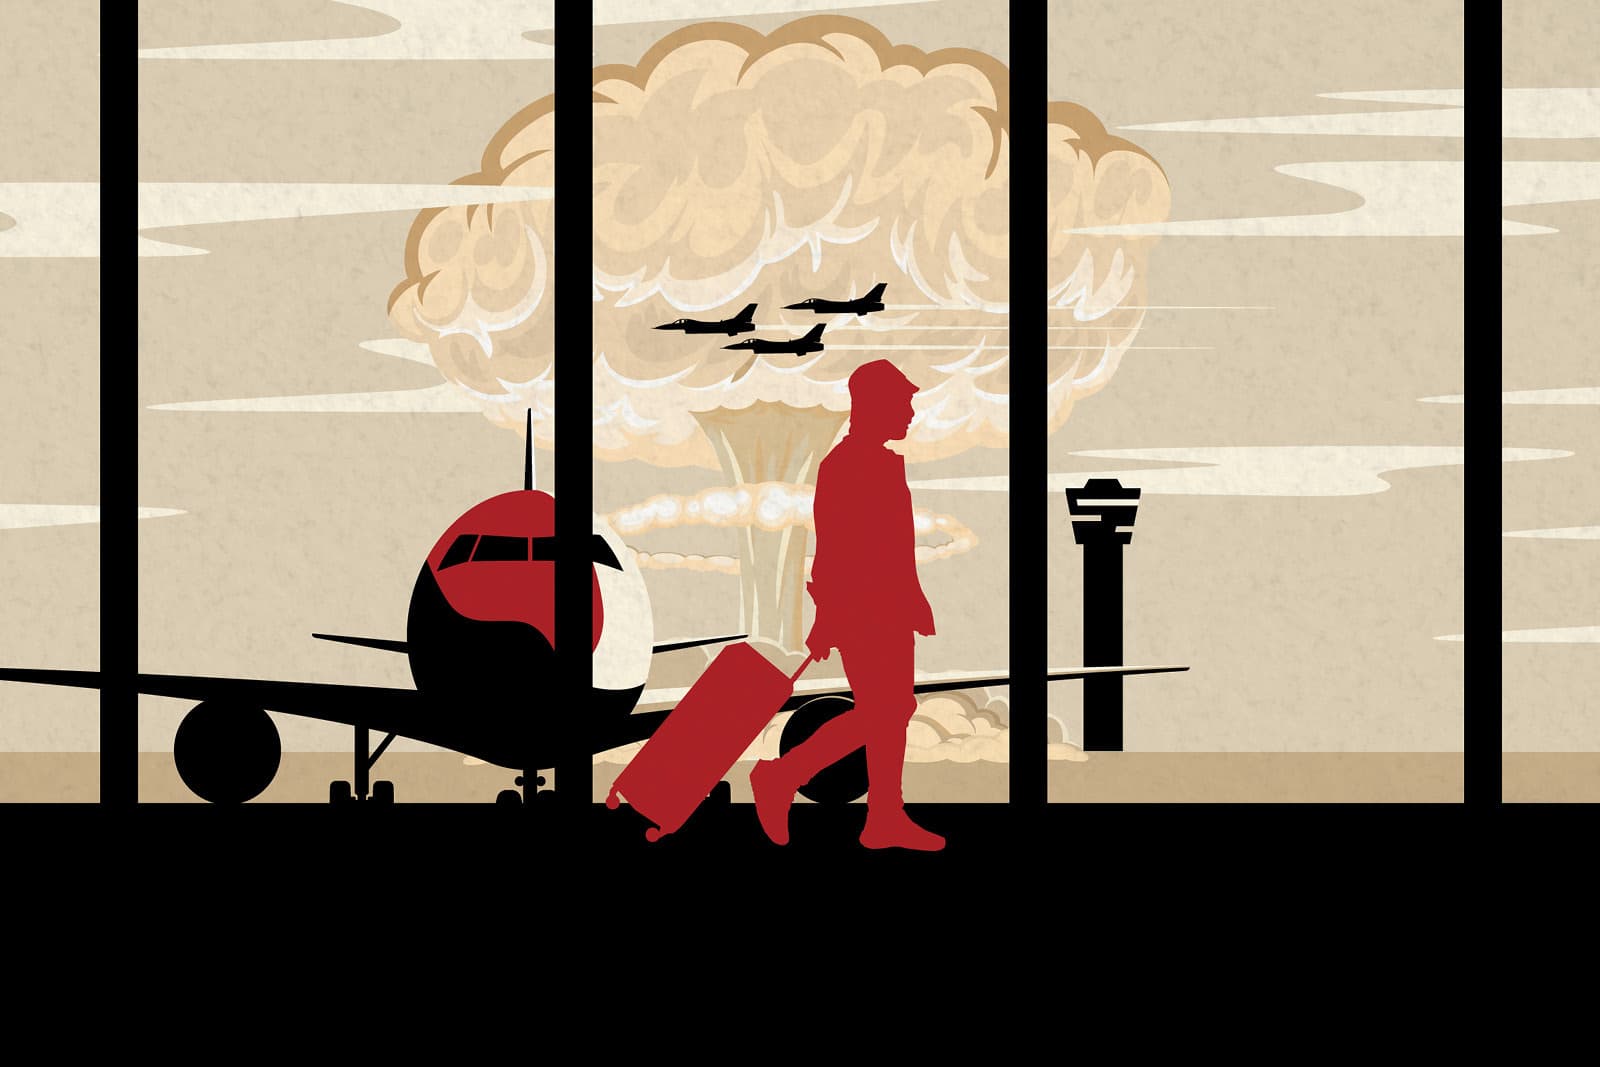 Man with suitcase walks past grounded plane with mushroom cloud and flying jets in the background